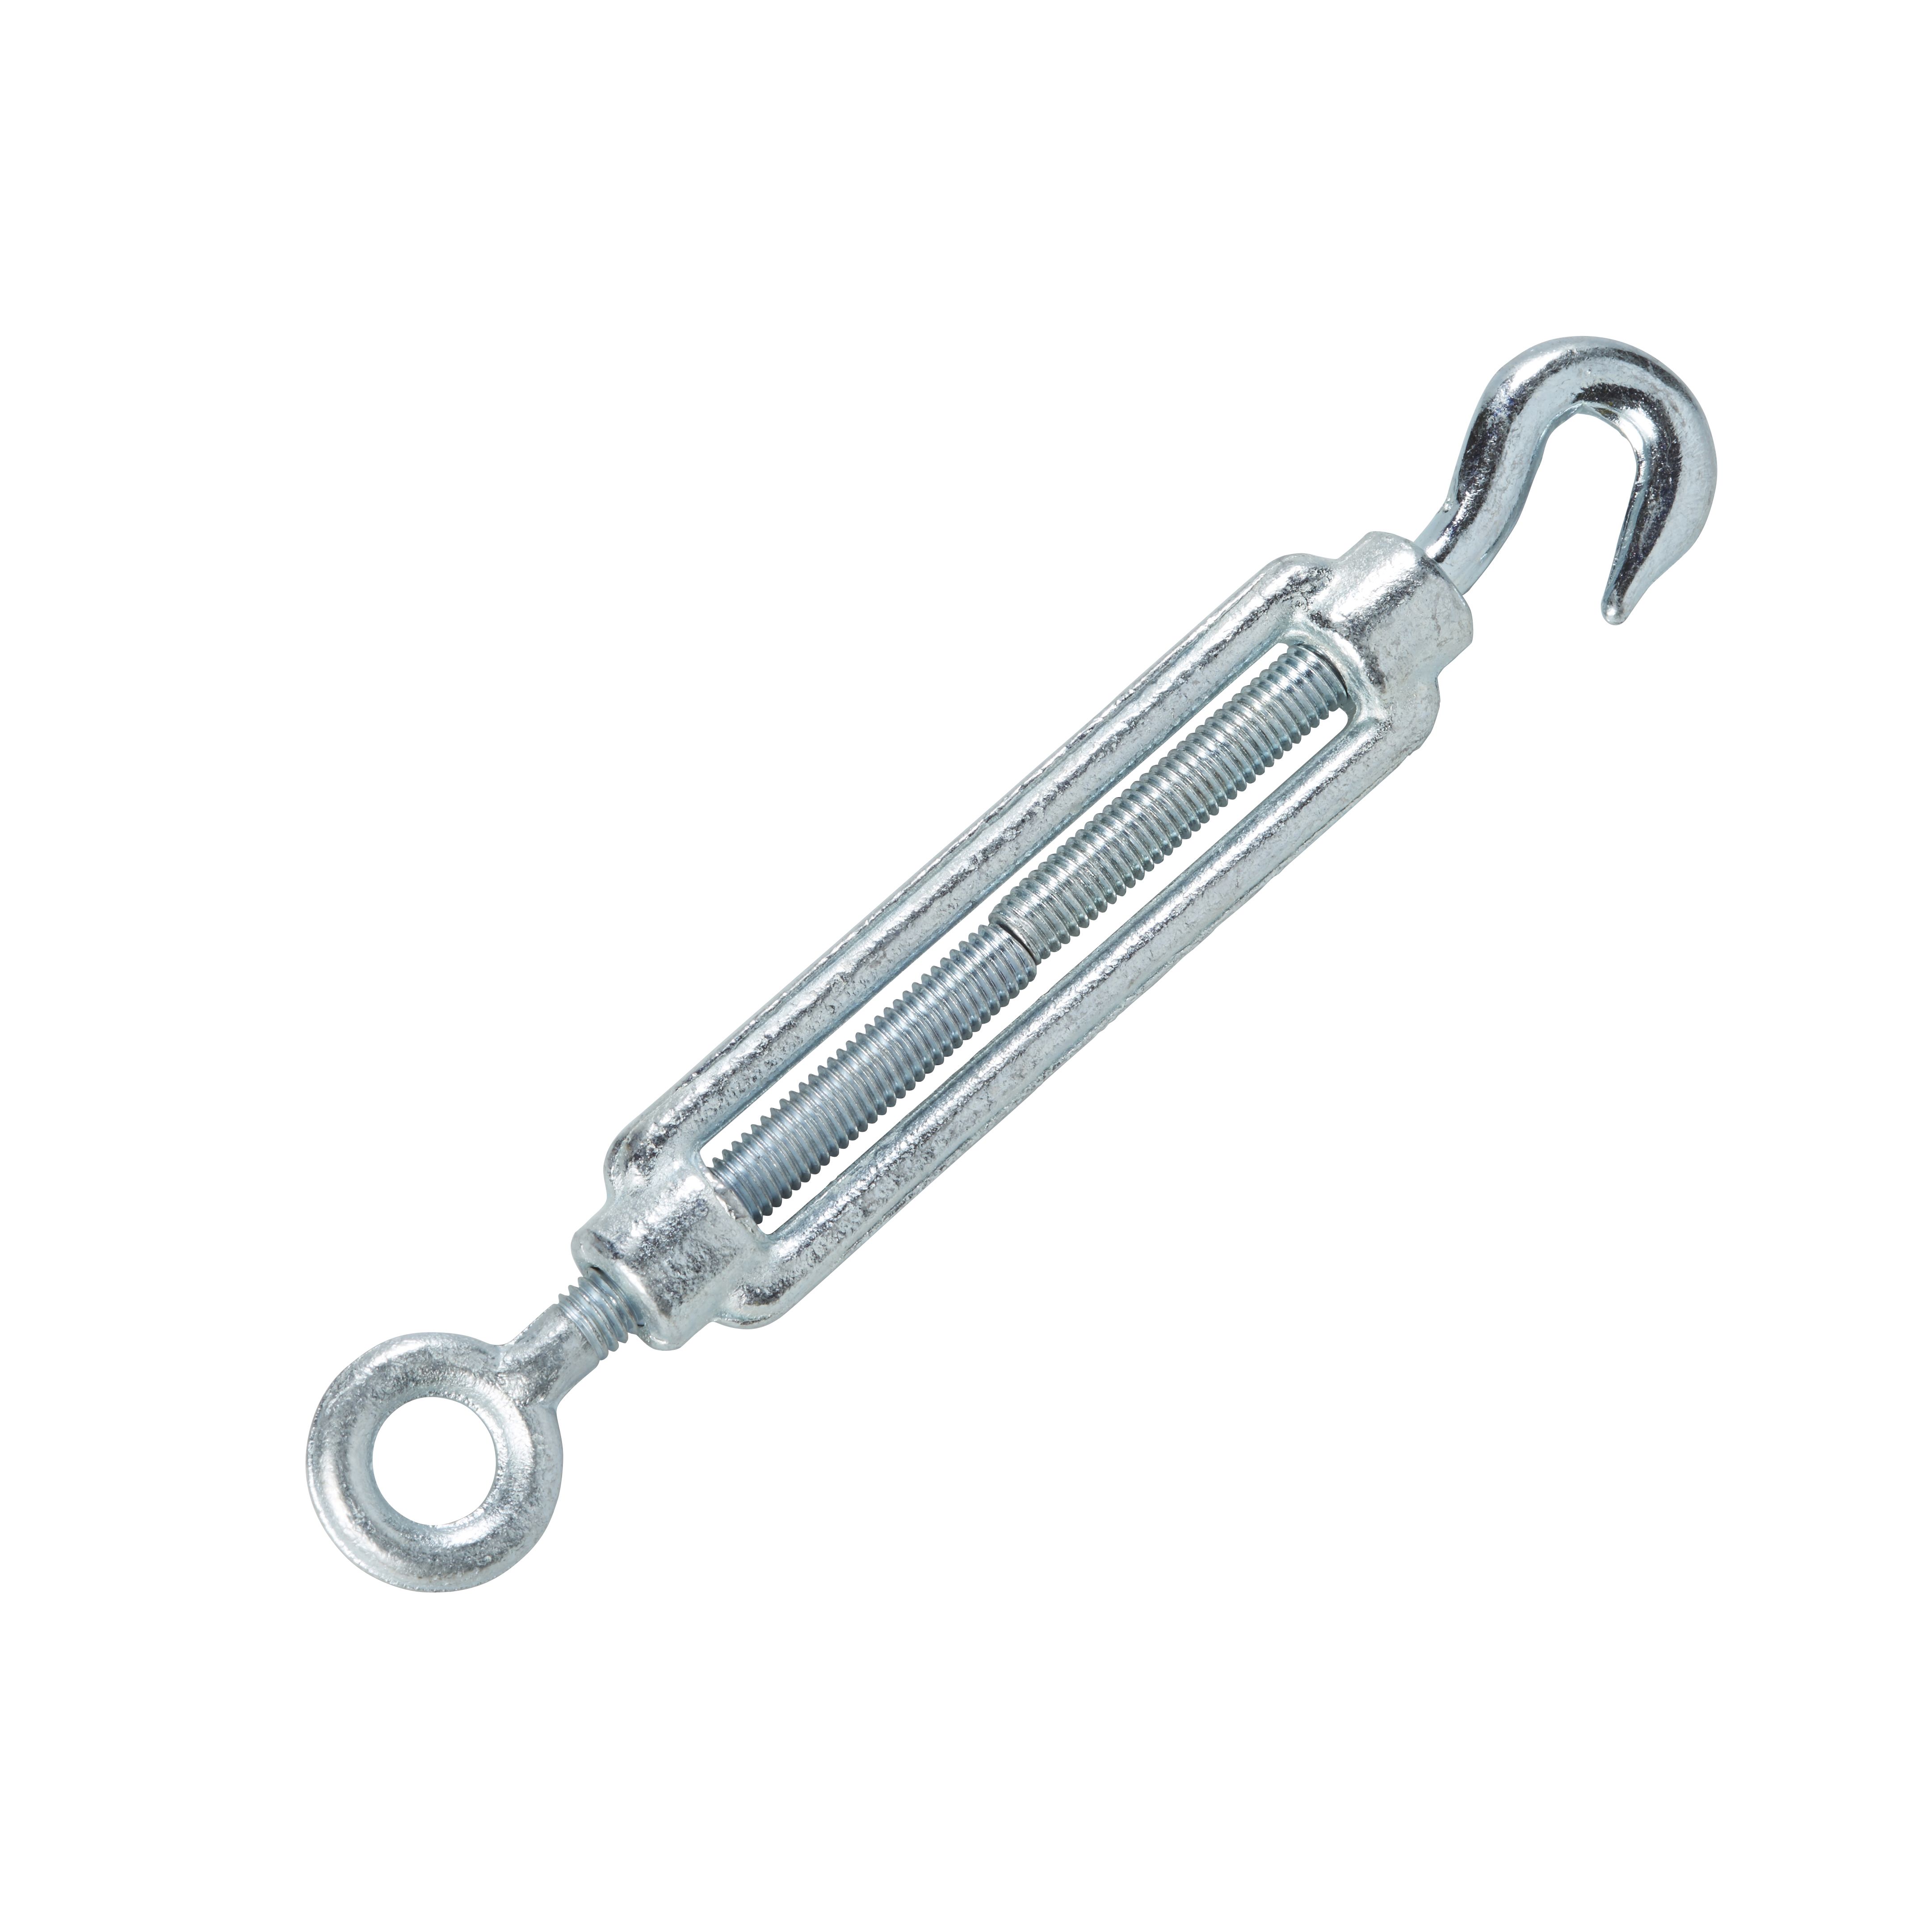 Diall Zinc-plated Stainless steel Hook & eye Turnbuckle, (Dia)12mm (Max)300kg